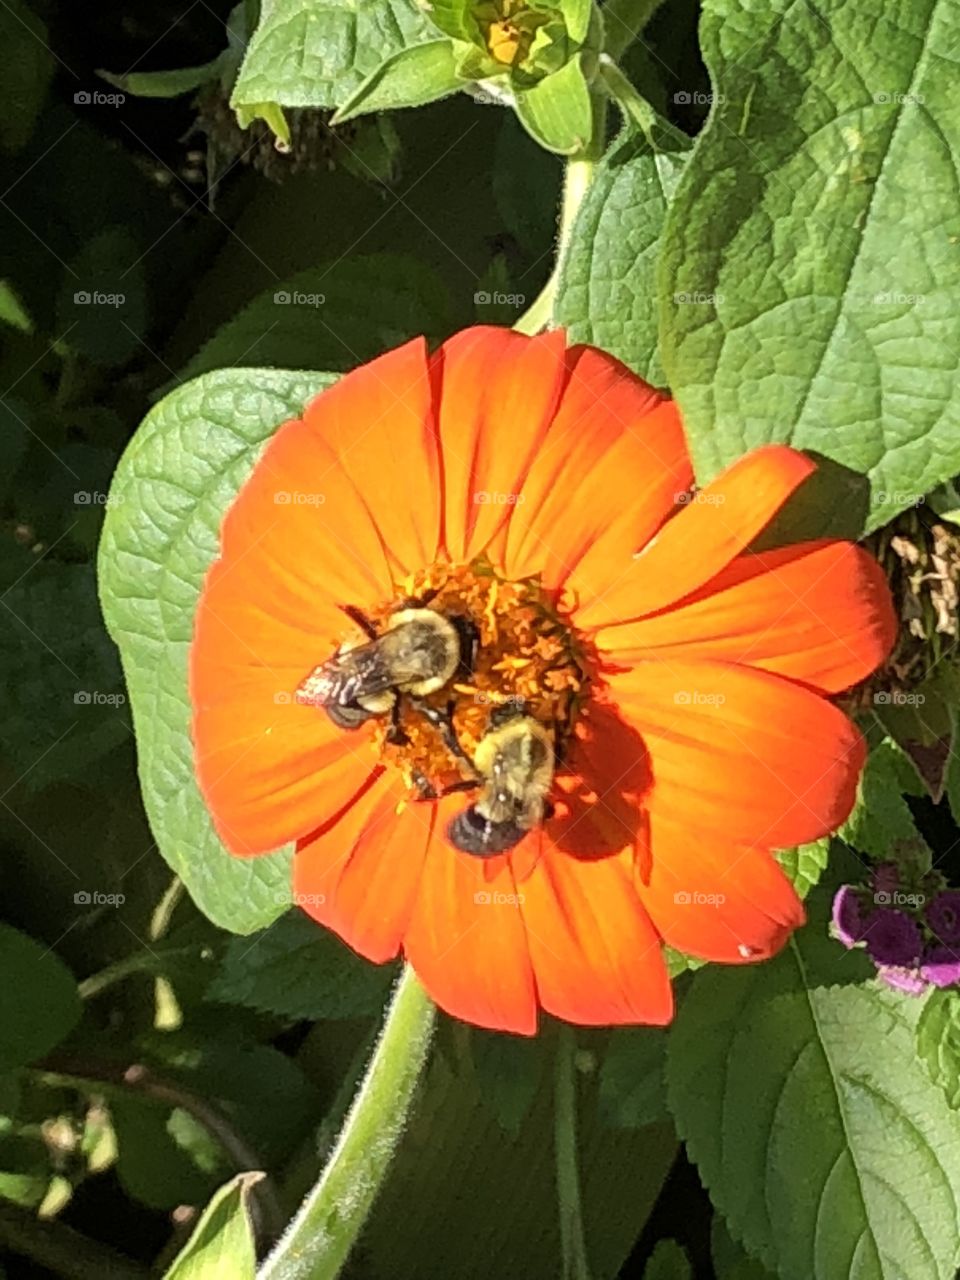 Flower with bees